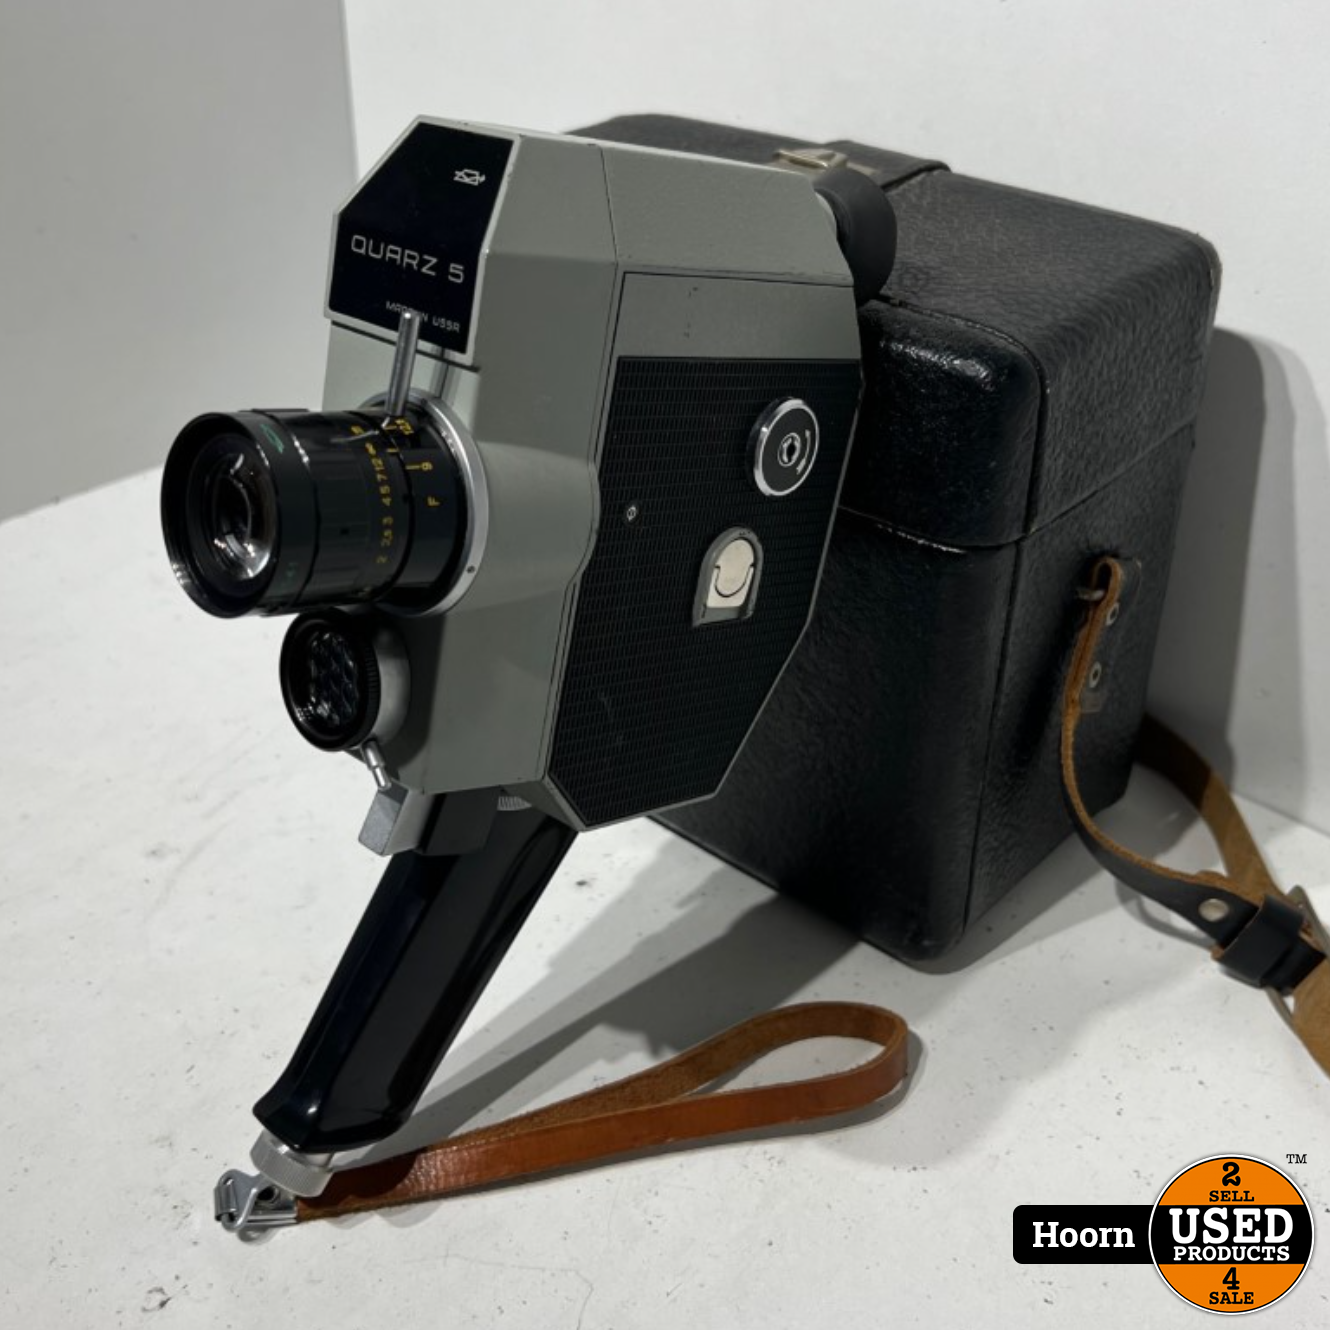 Quarz 5 Vintage Camera 8mm - Used Products